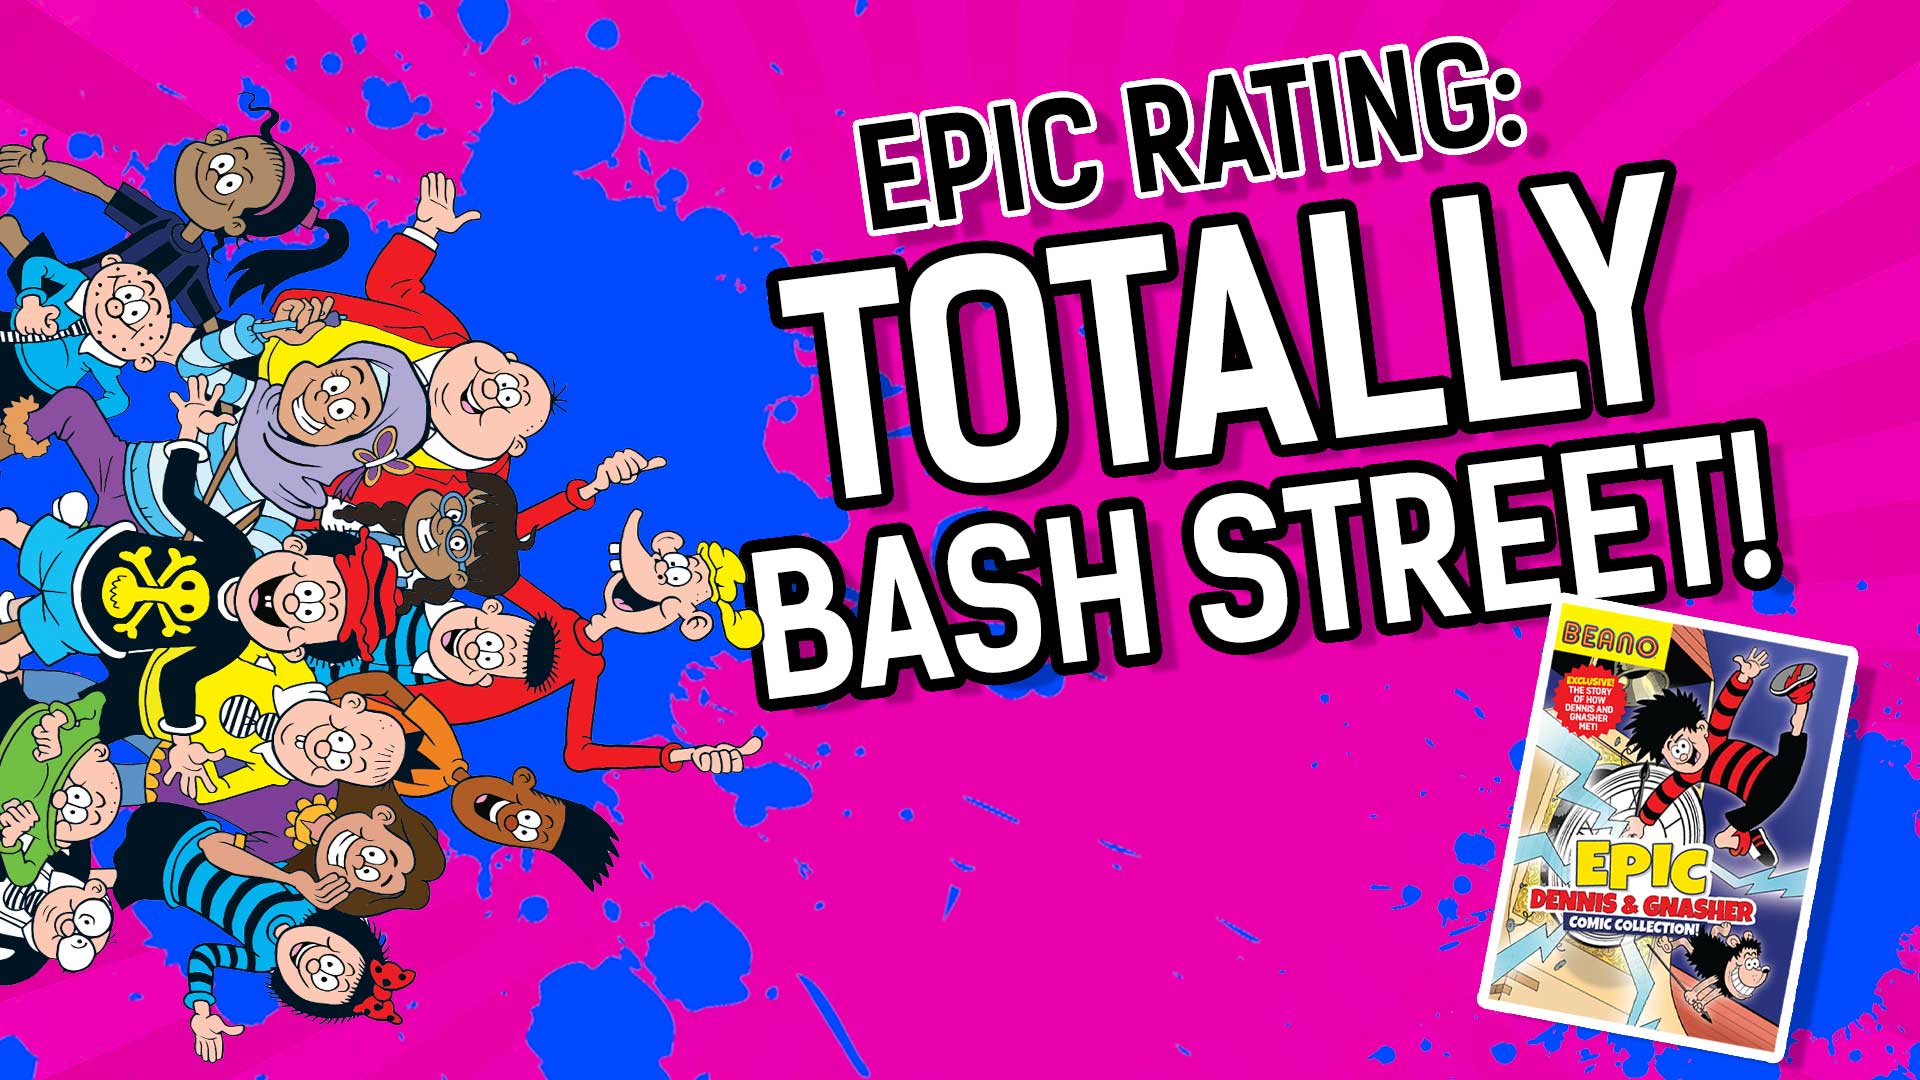 Epic Rating: Totally Bash Street